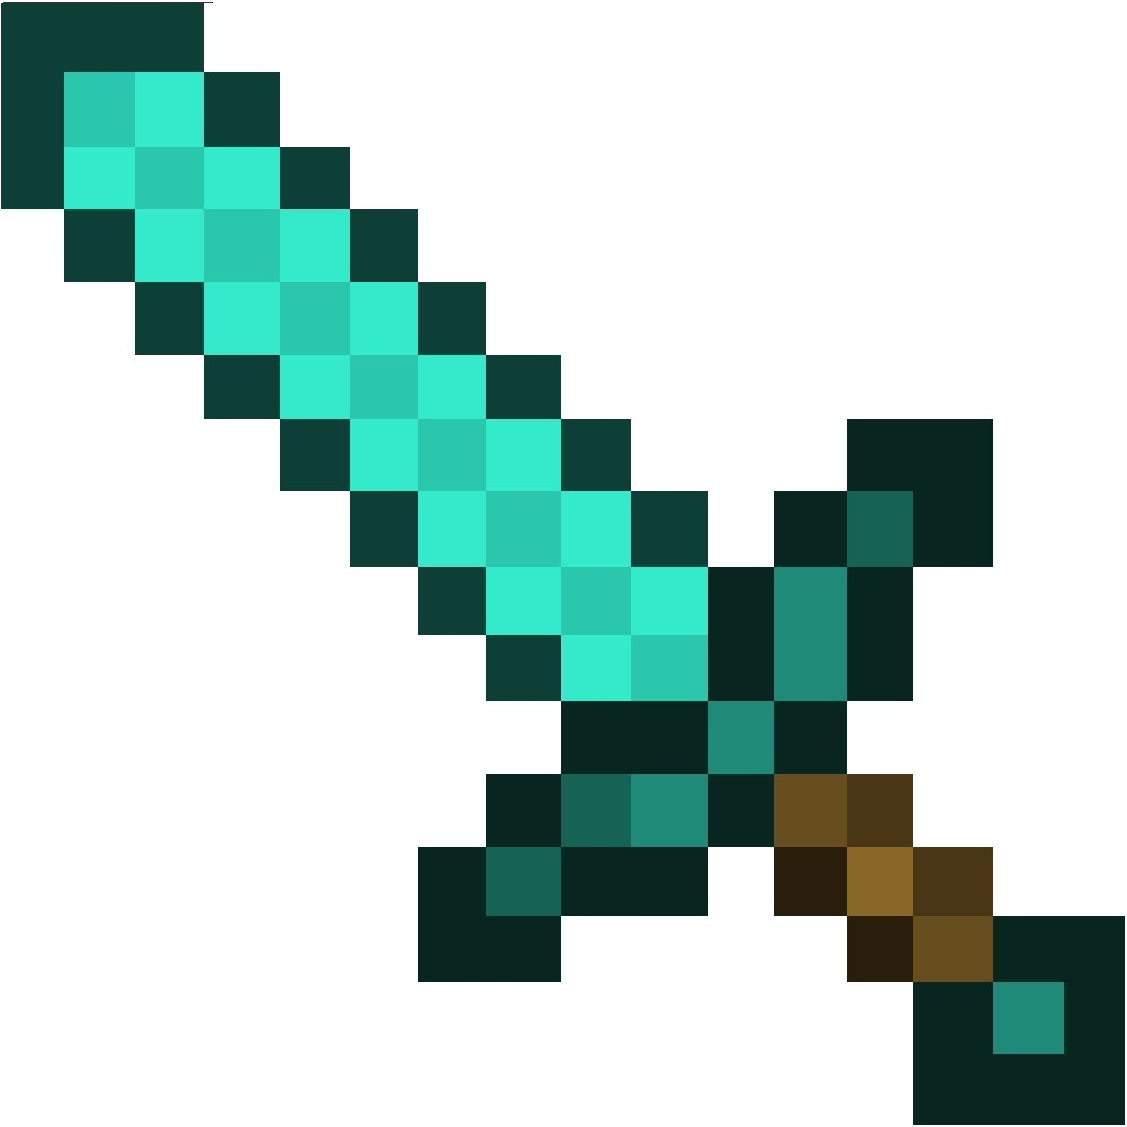 There Is 20 Watermarked Minecraft Creeper   Free Cliparts All Used For